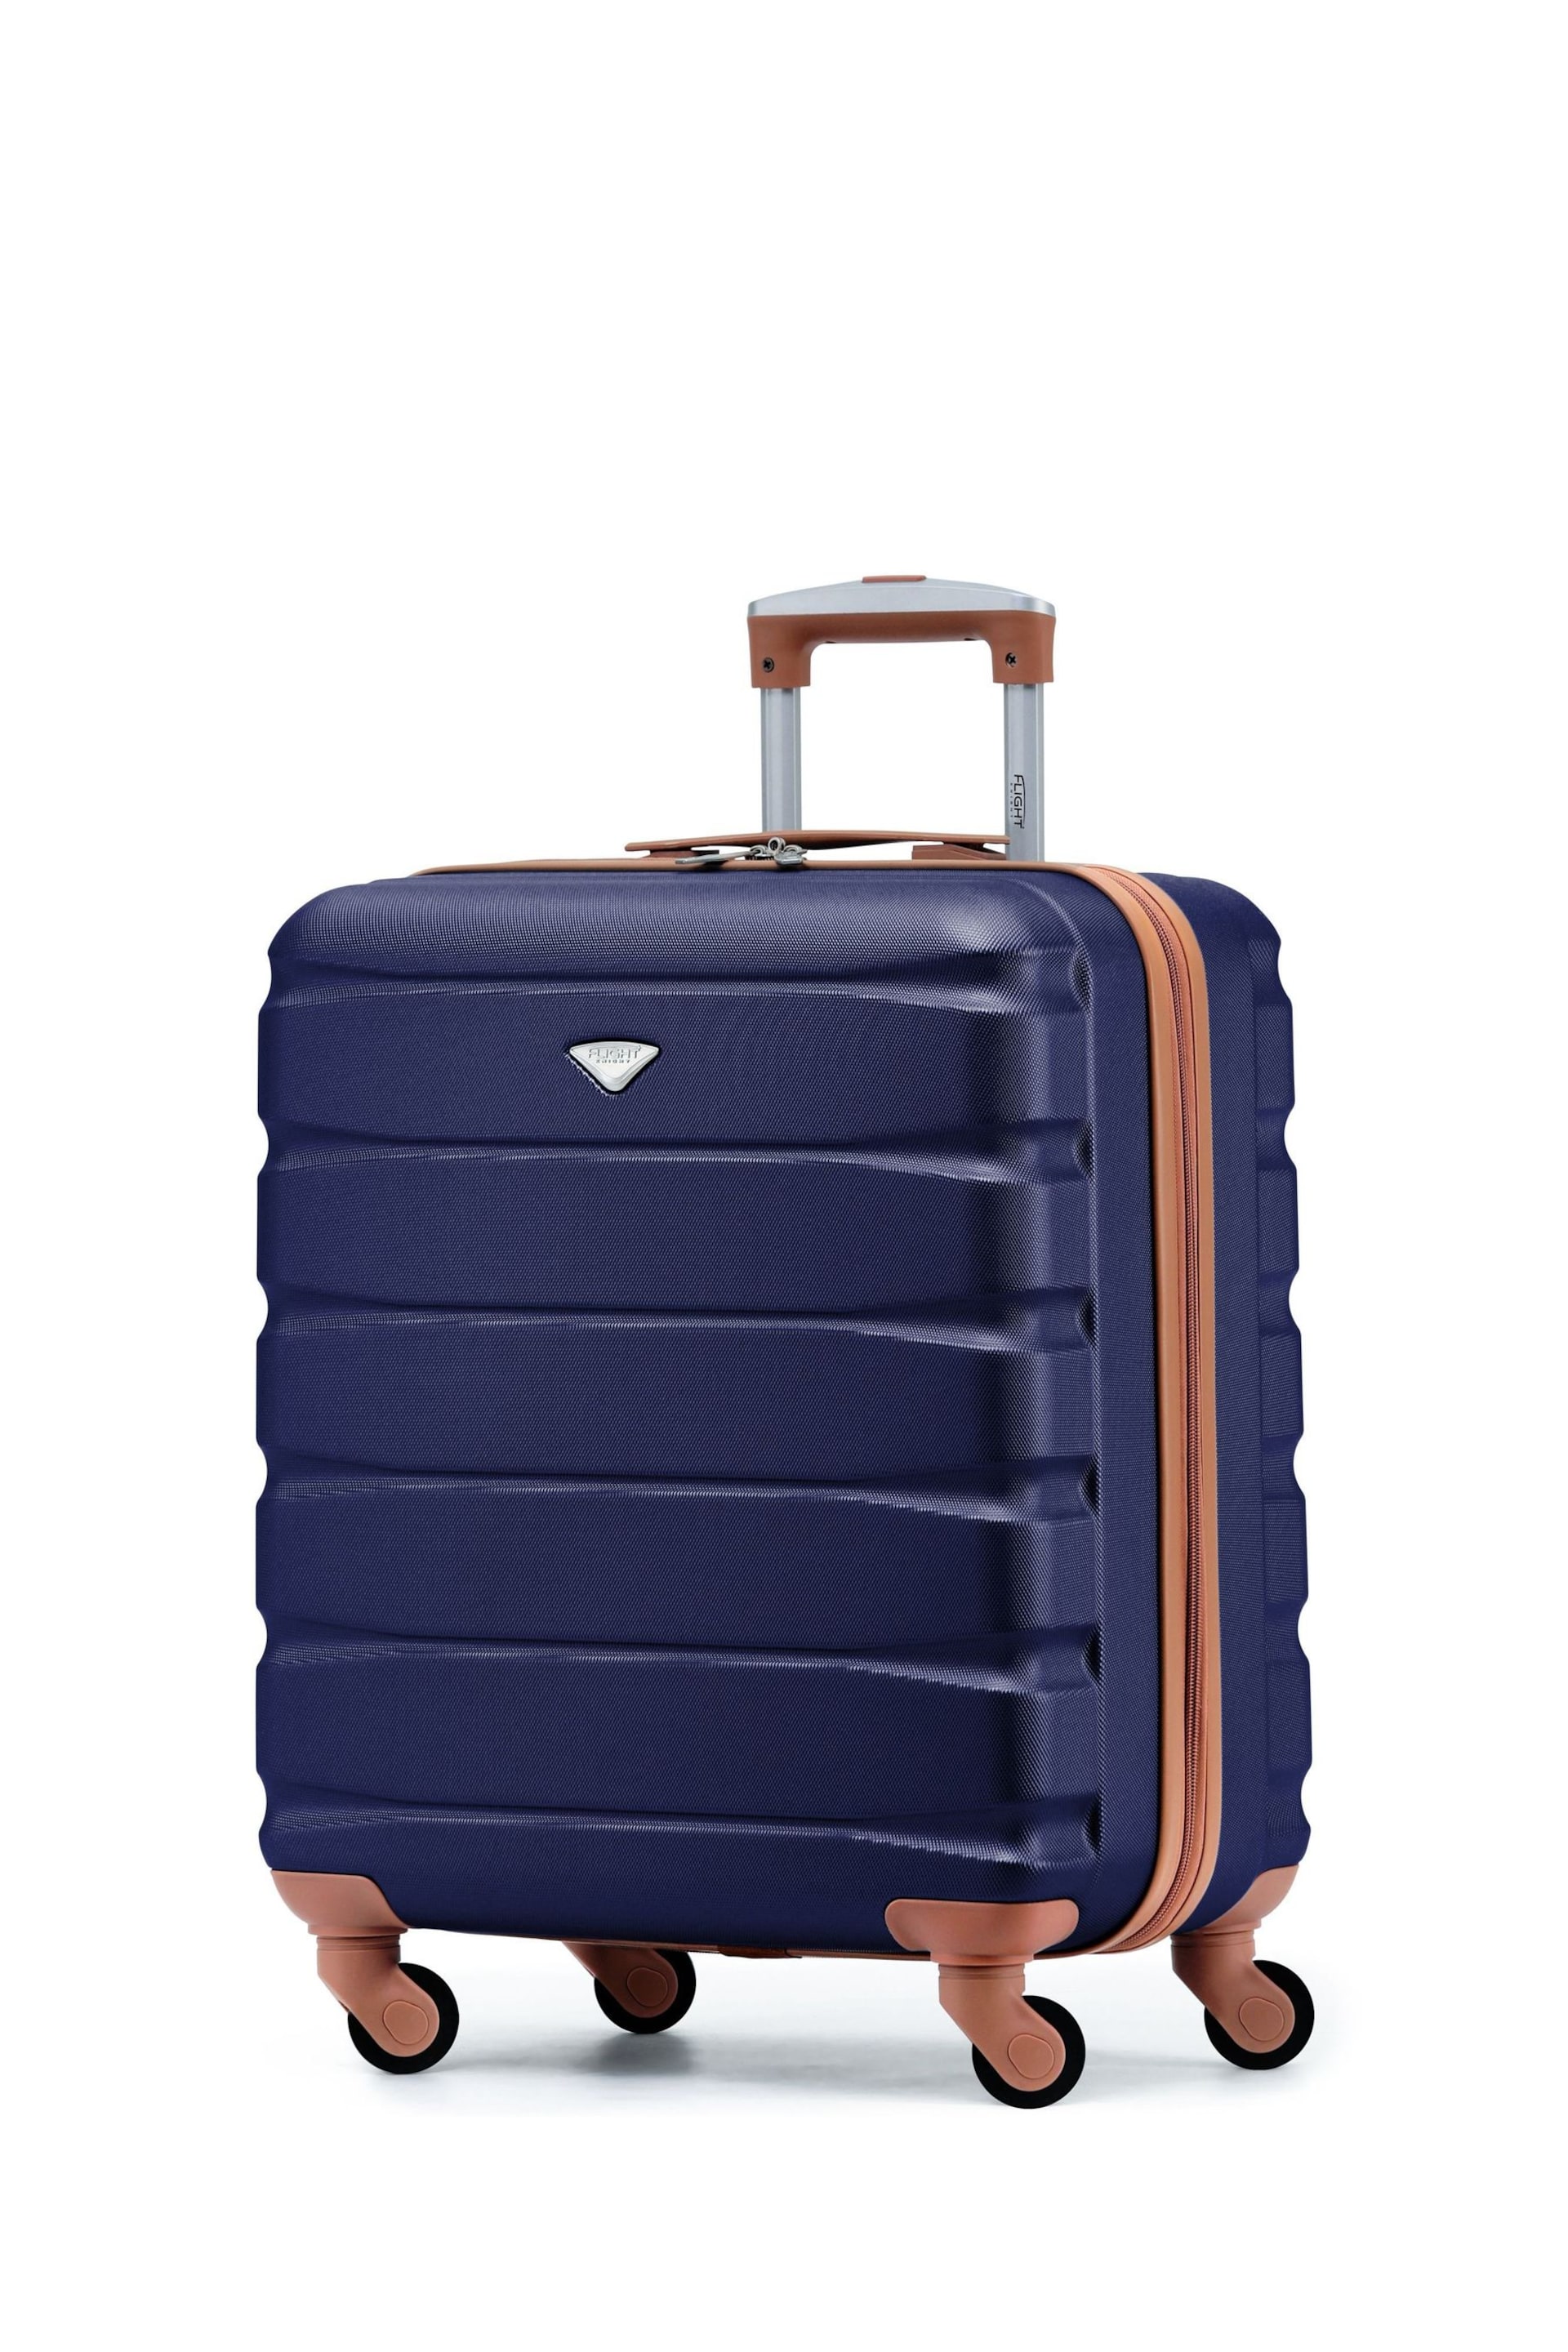 Flight Knight 56x45x25cm EasyJet Overhead 4 Wheel ABS Hard Case Cabin Carry On Hand Black Luggage - Image 1 of 7